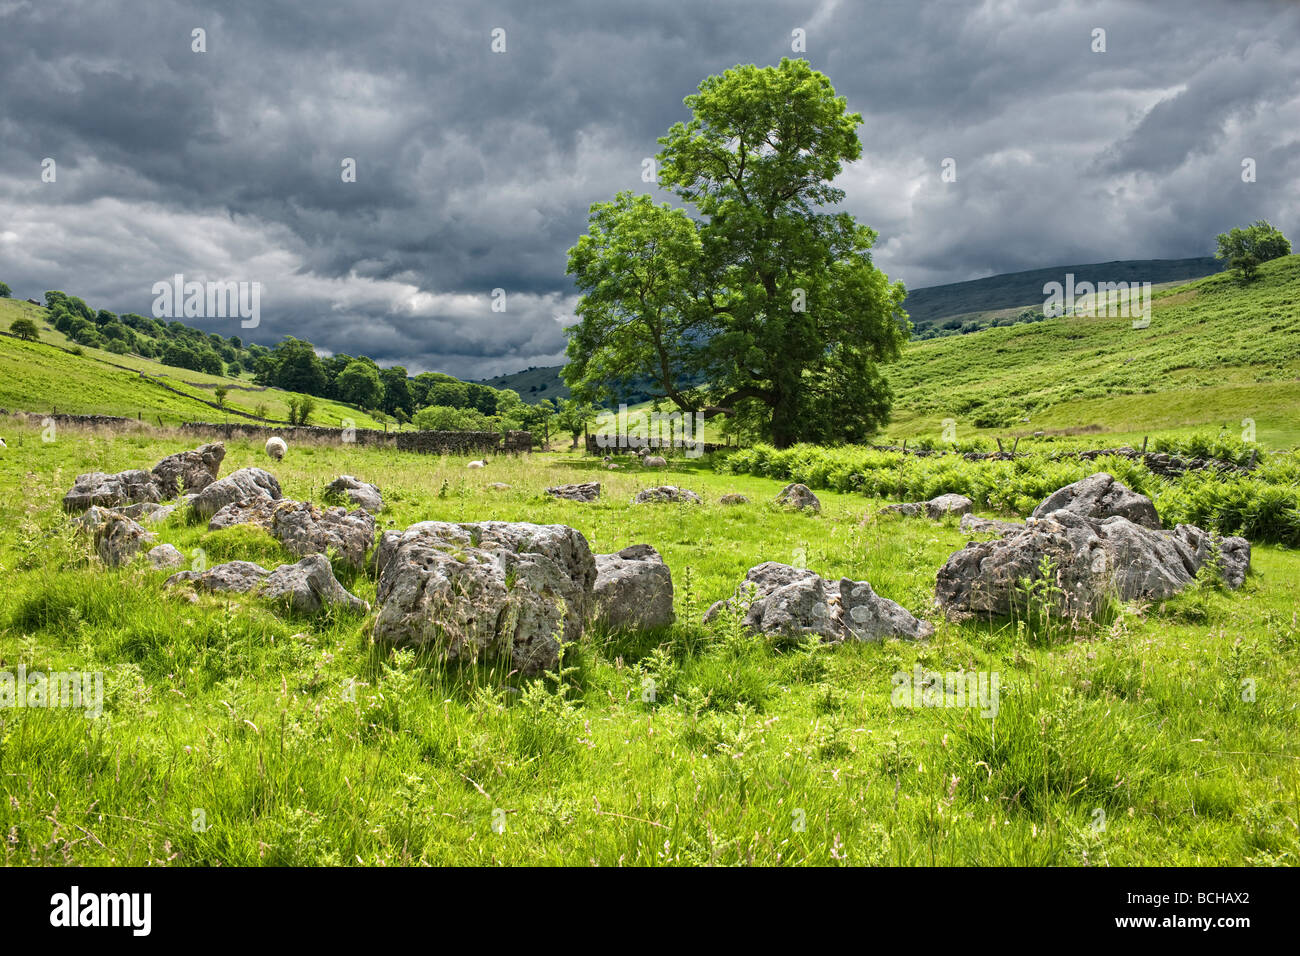 Stone Circle or possibly a Ring Cairn at Yockenthwaite, Yorkshire Dales UK Stock Photo